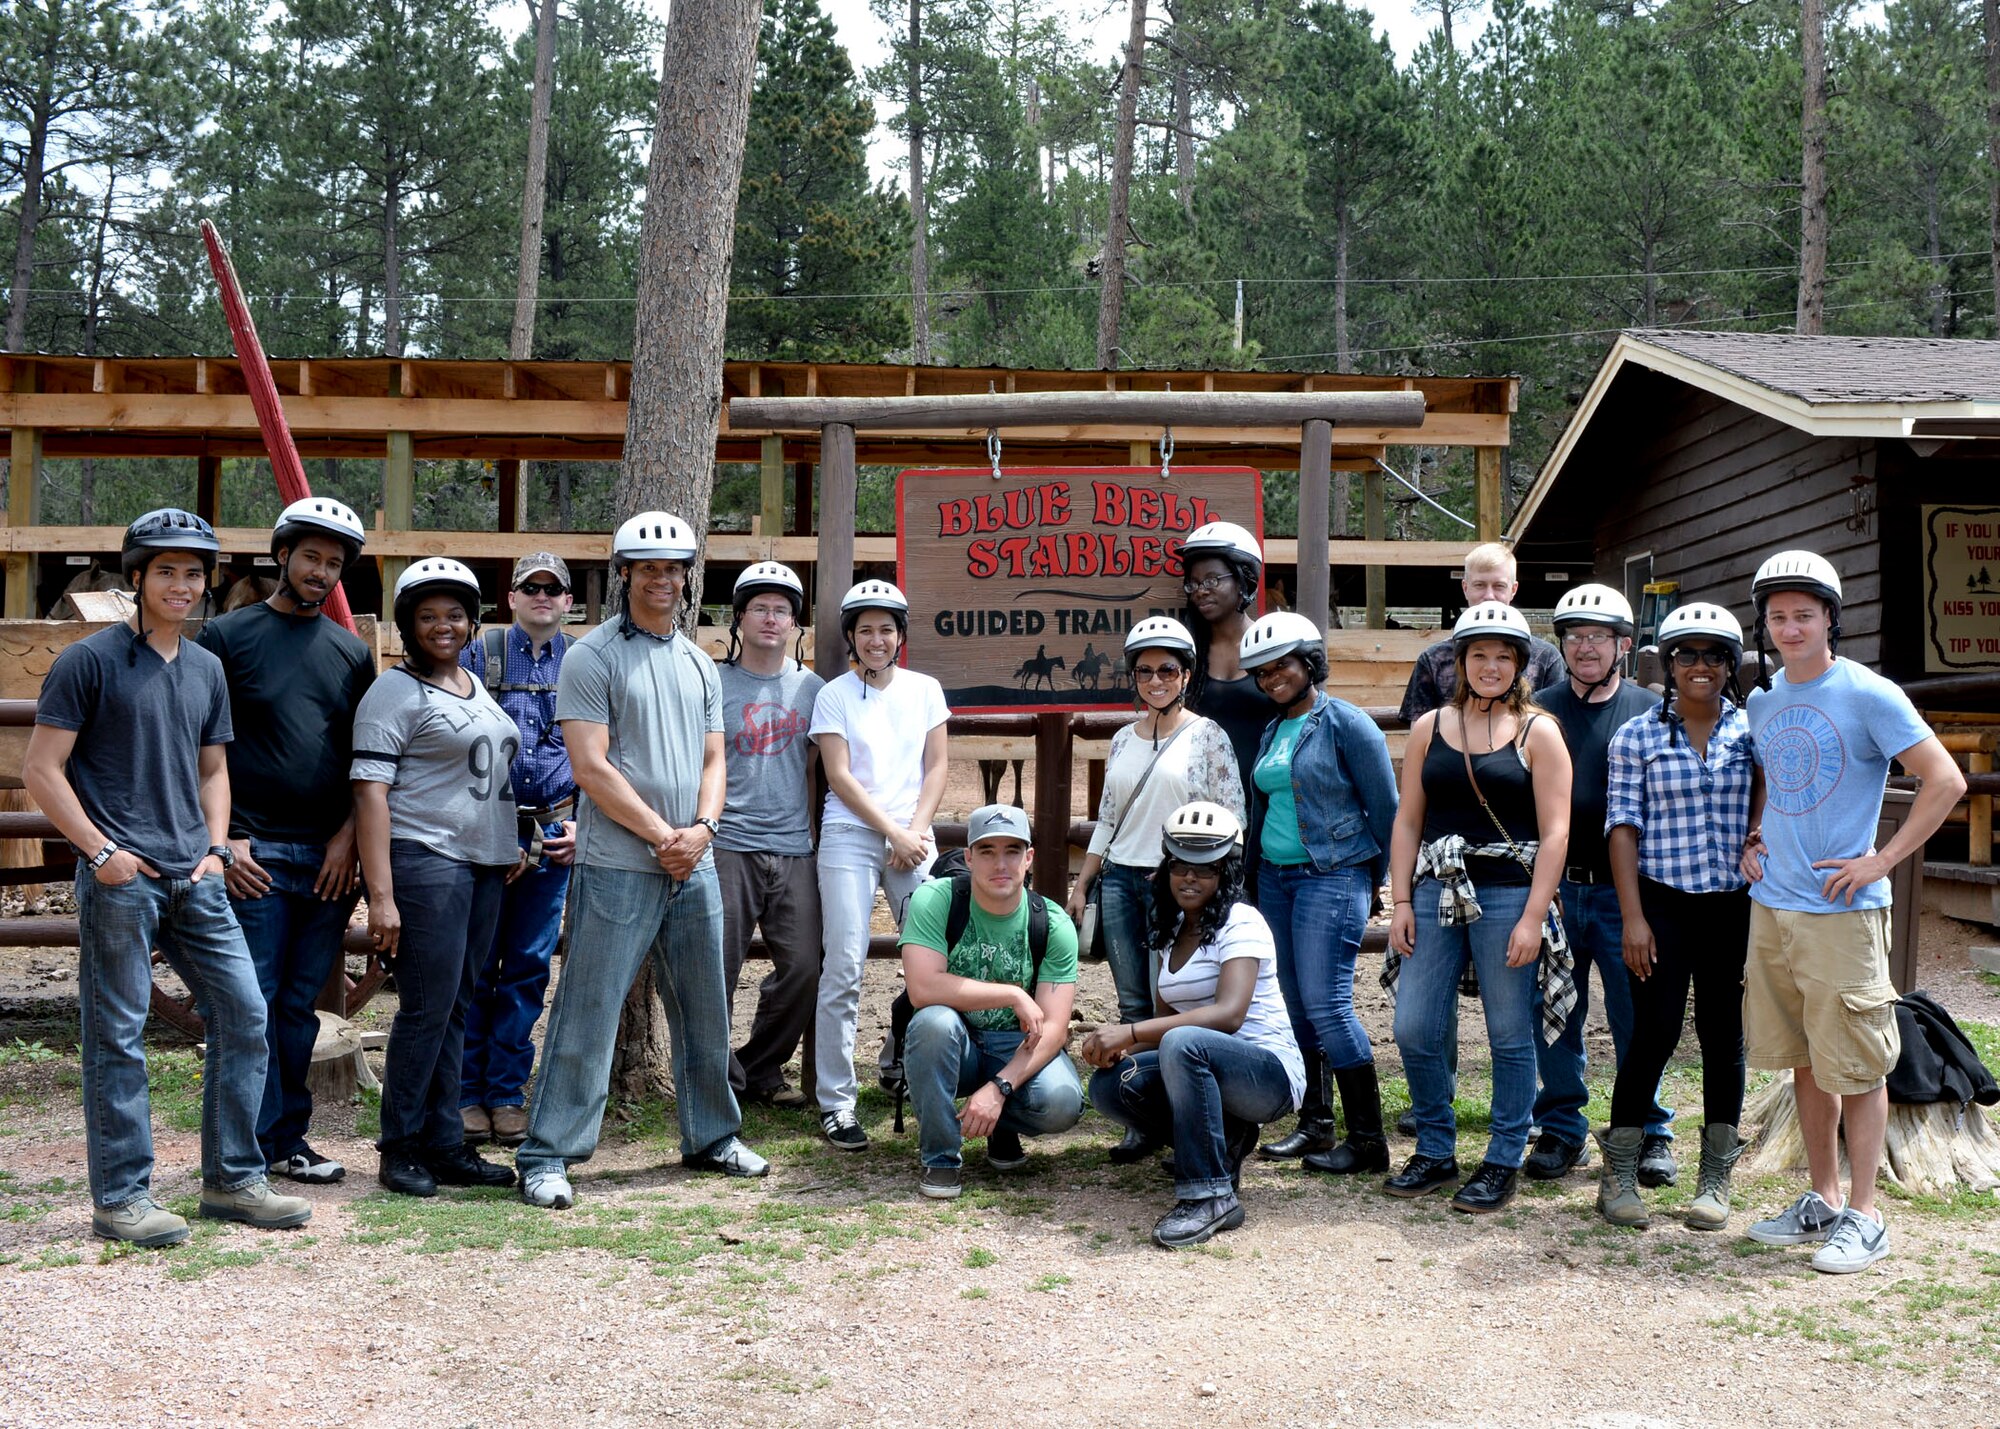 Ellsworth Airmen pose for a group photo after participating in a trail ride through Custer State Park, S.D. The 28th Force Support Squadron outdoor recreation staff sponsored the event to provide Airmen the opportunity to experience South Dakota’s outdoors.  (U.S. Air Force photo by Senior Airman Anania Tekurio/Released)